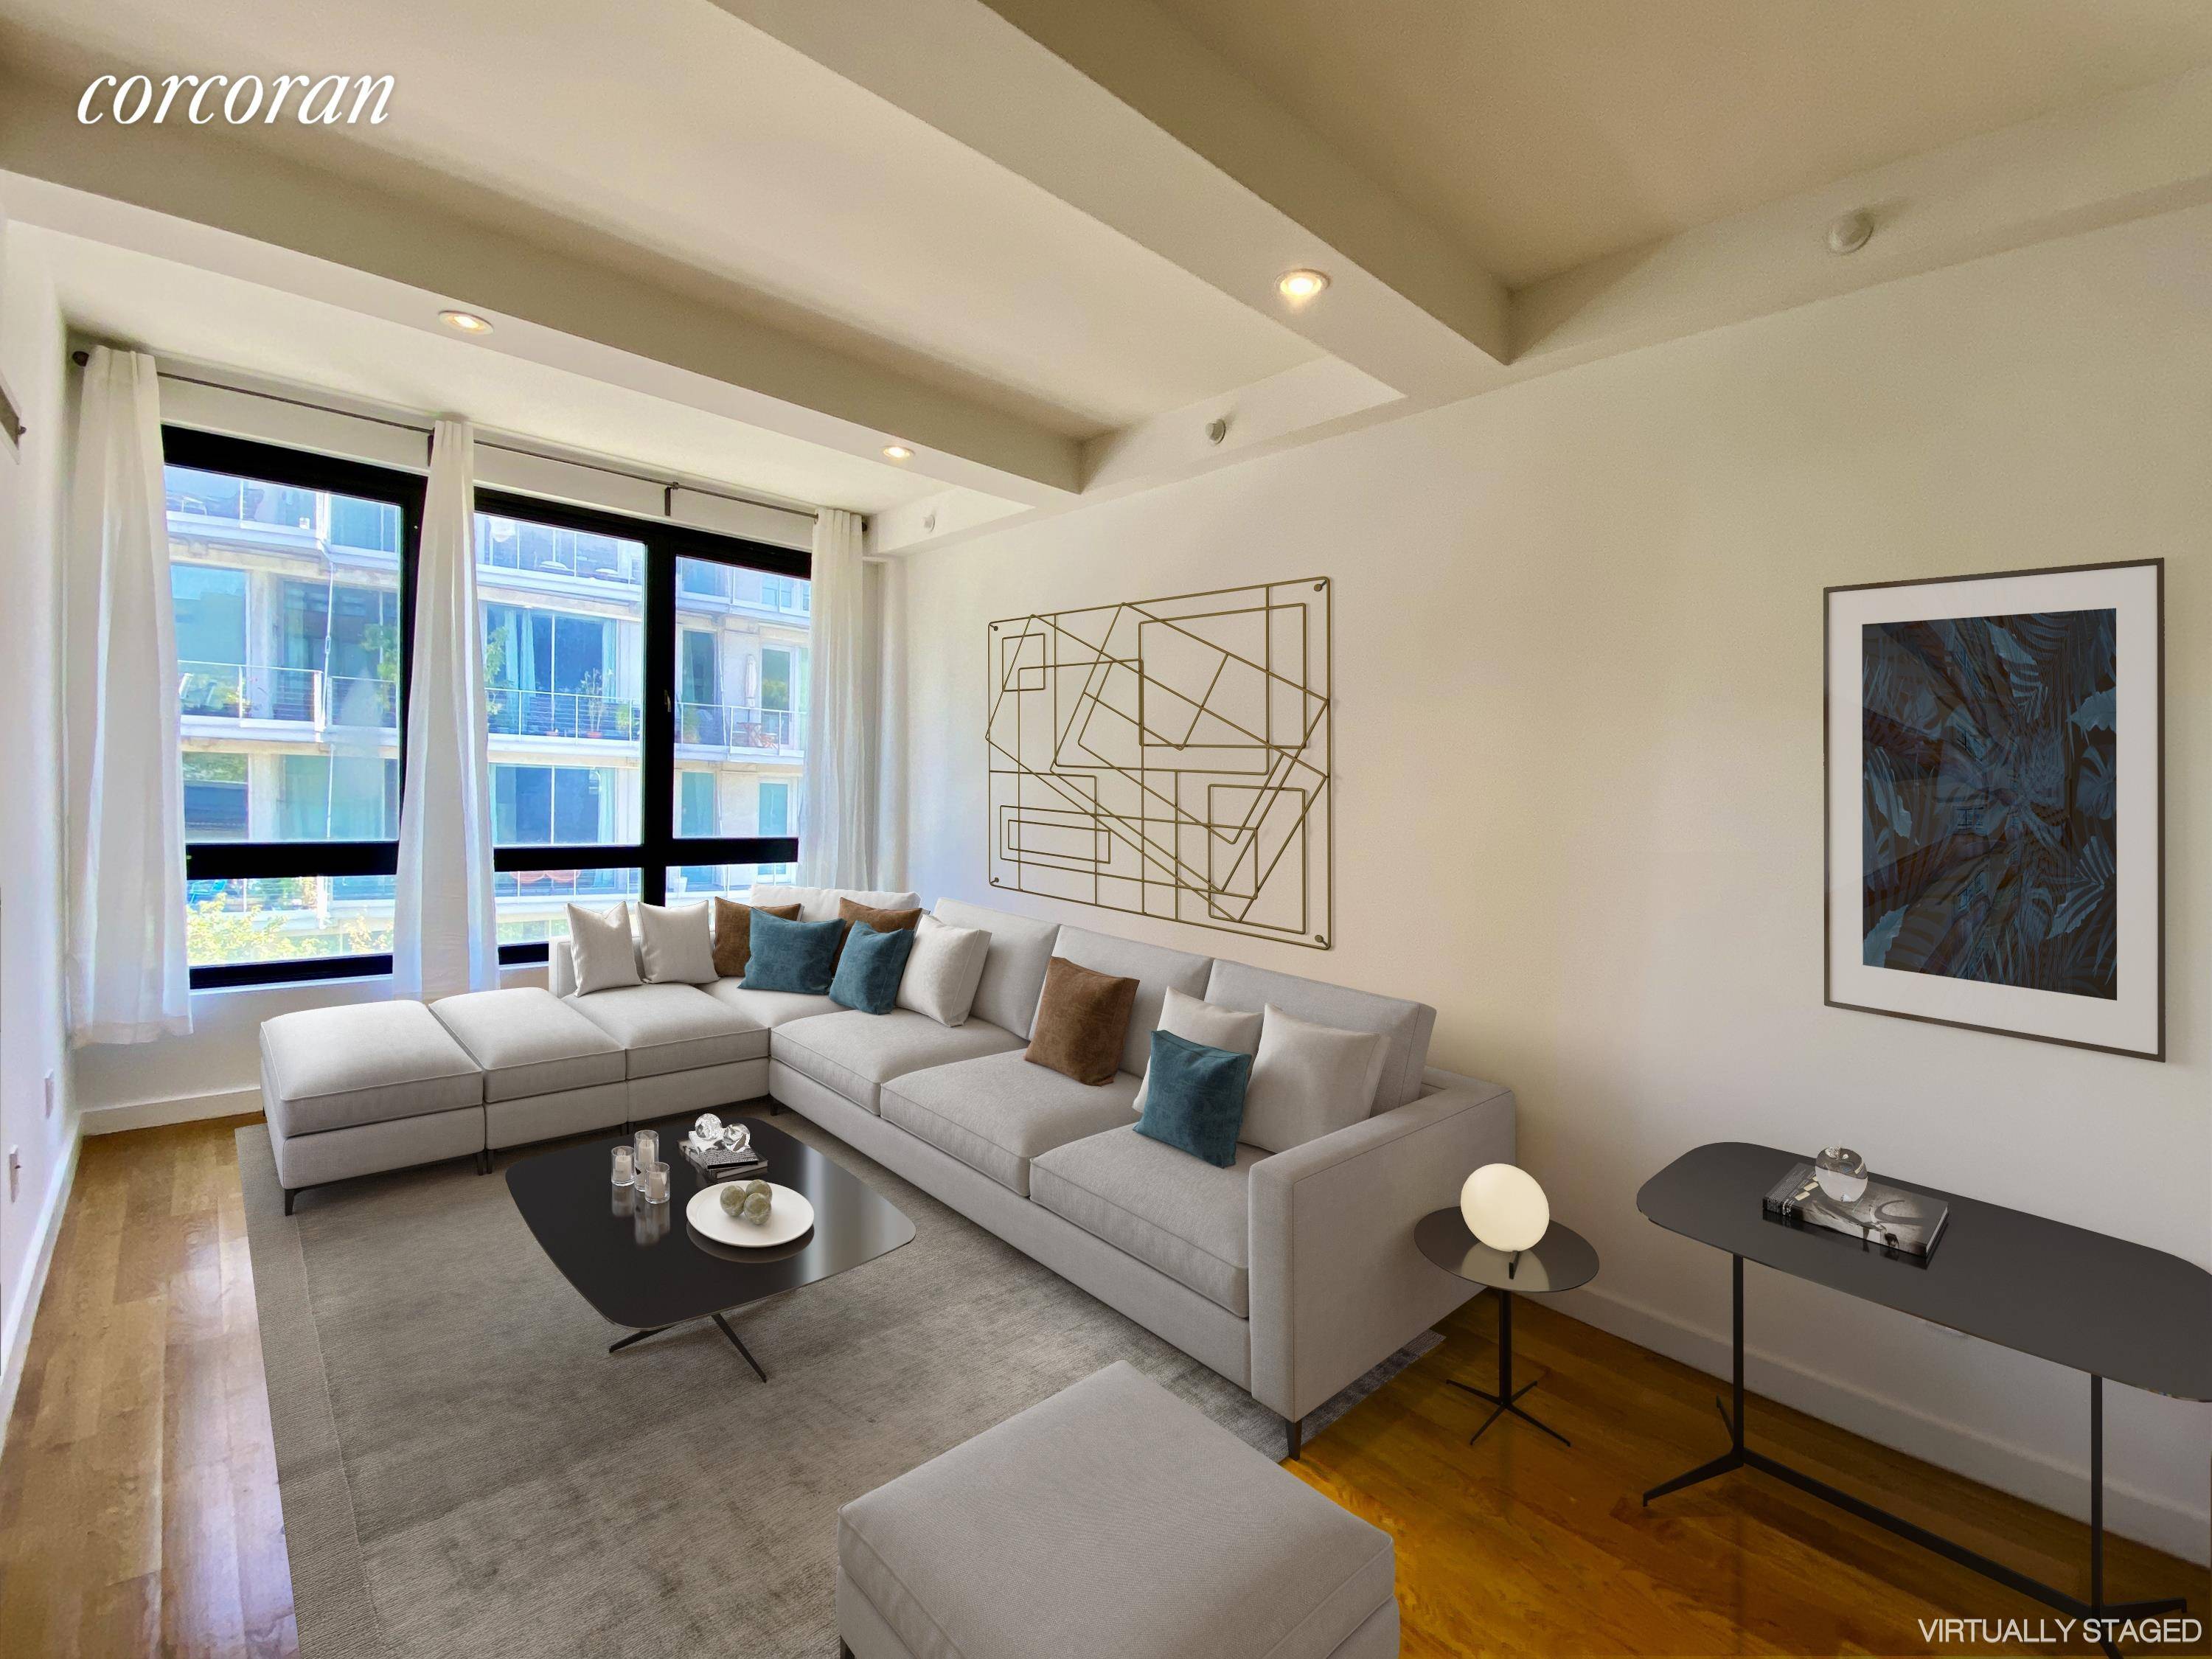 NO FEE ! This bright and spacious 1 bedroom apartment with an oversized bedroom located in Dumbo Vinegar Hill.